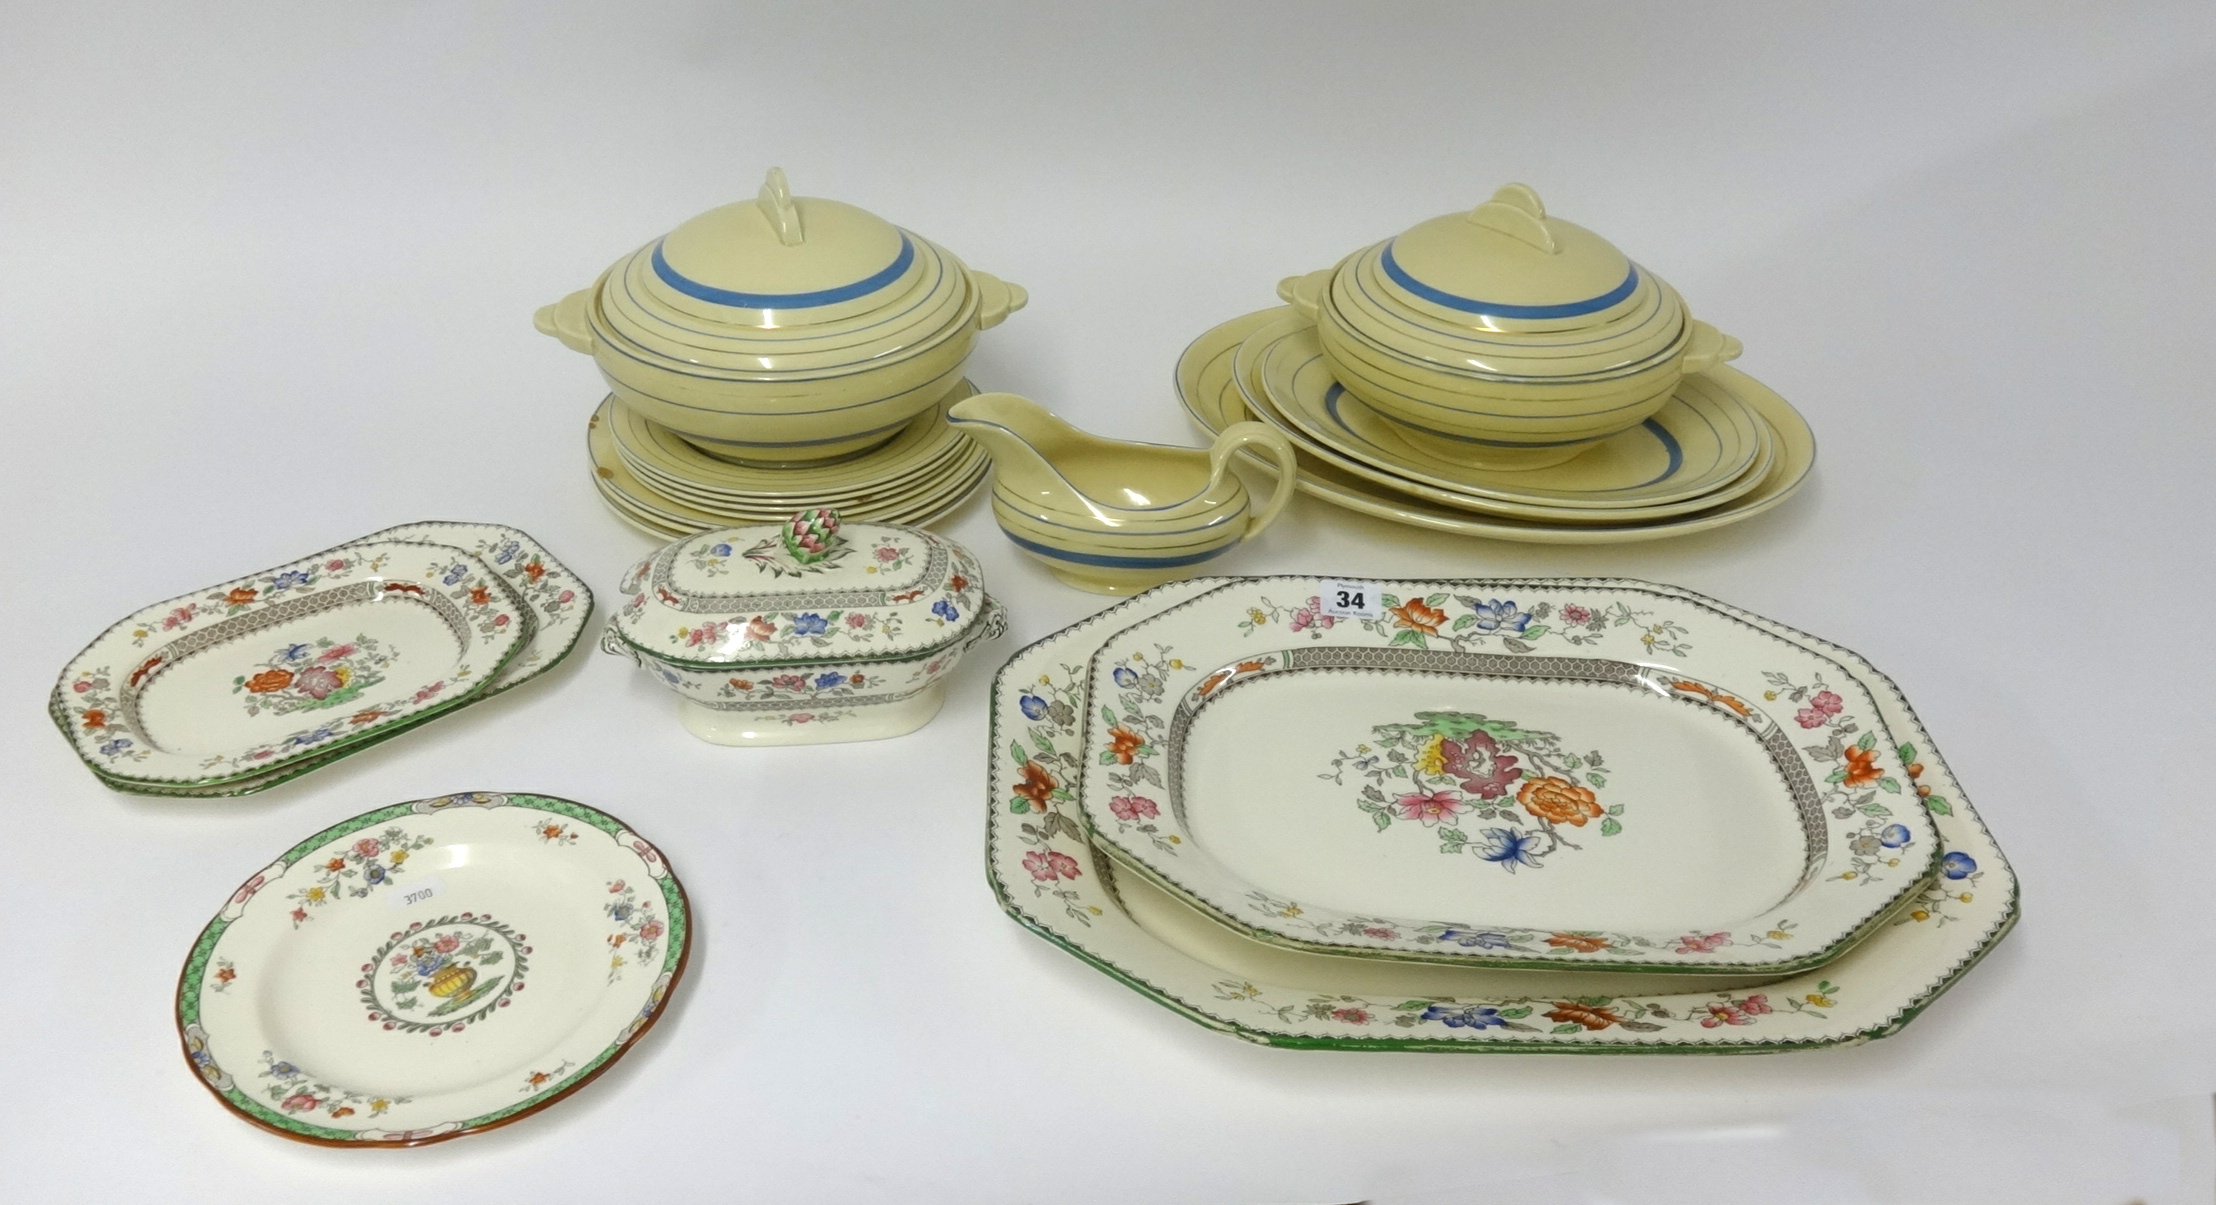 Copeland Spode Chinese Rose part dinner wares and Clarice Cliff banded pattern dinnerware's.